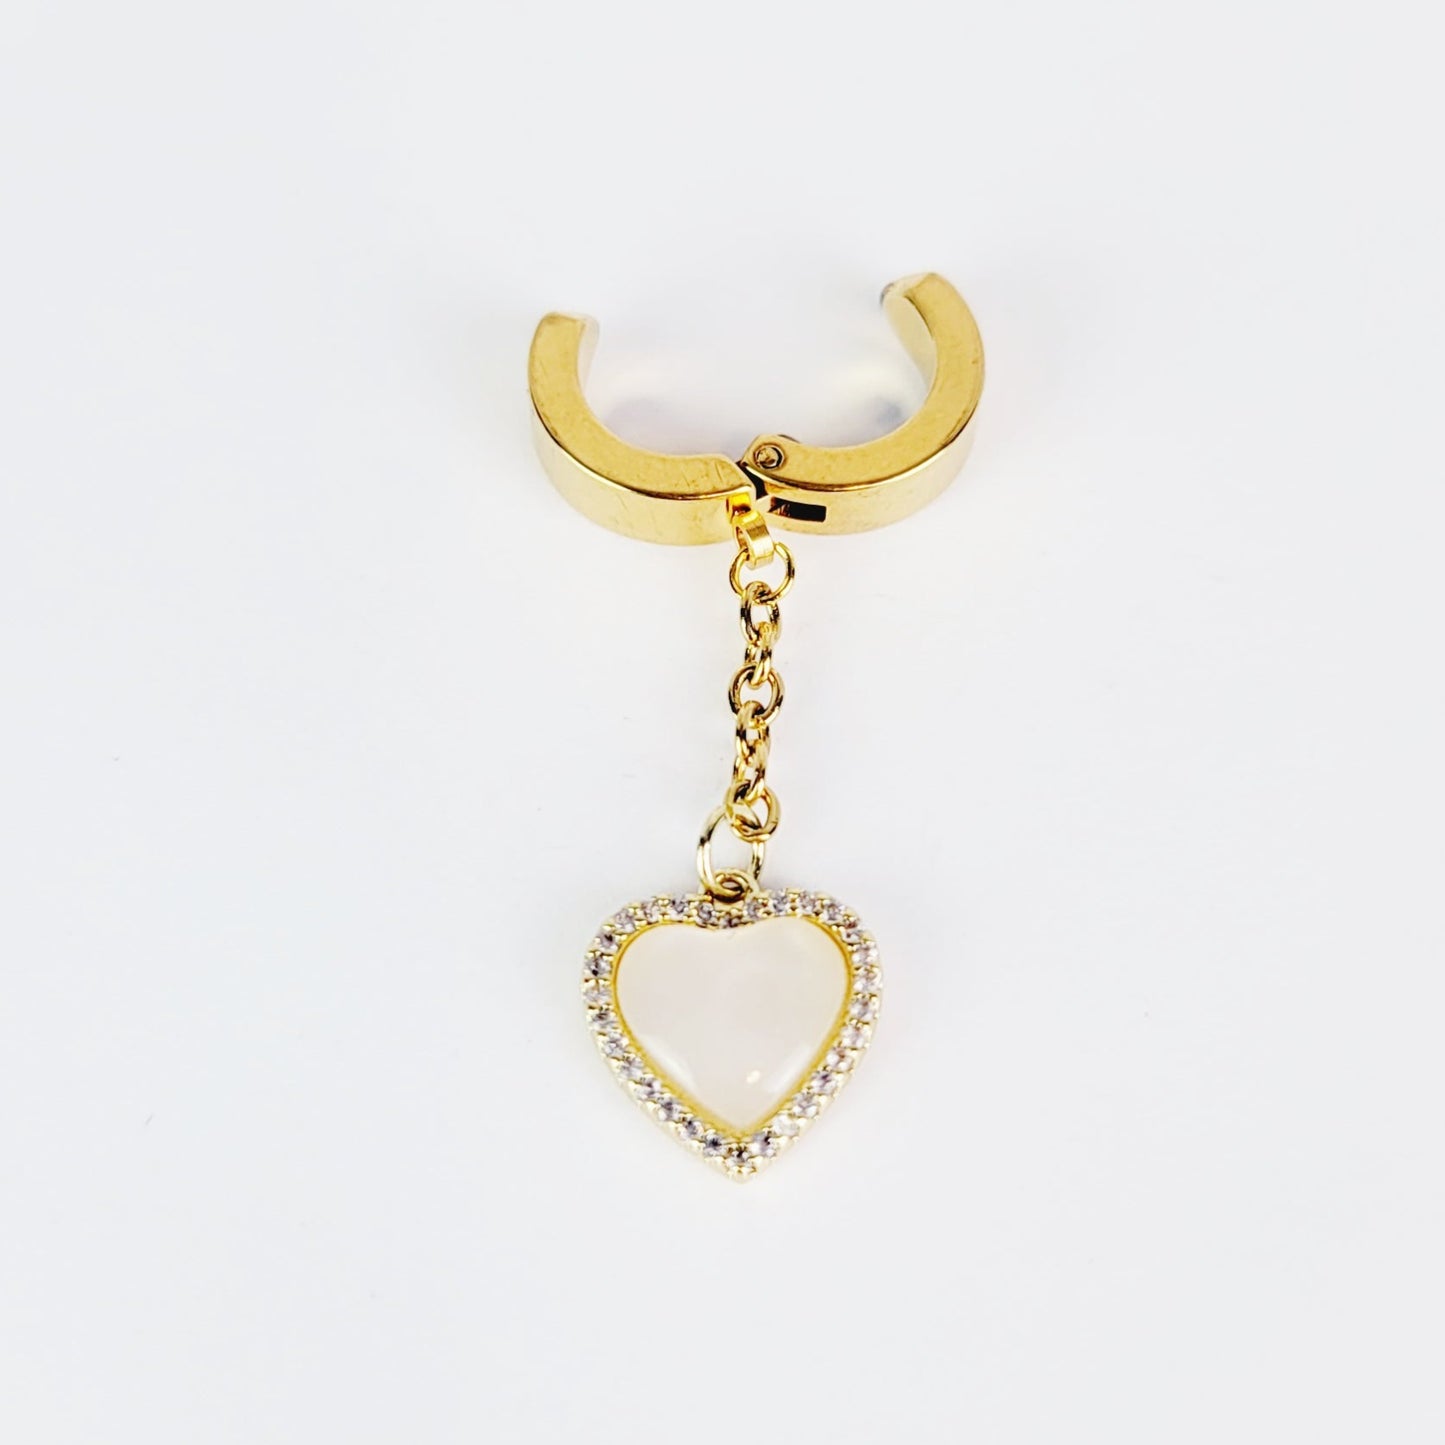 Intimate Jewelry Clip. Non Piercing Gold Stainless Steel Dangling Heart VCH Clip.